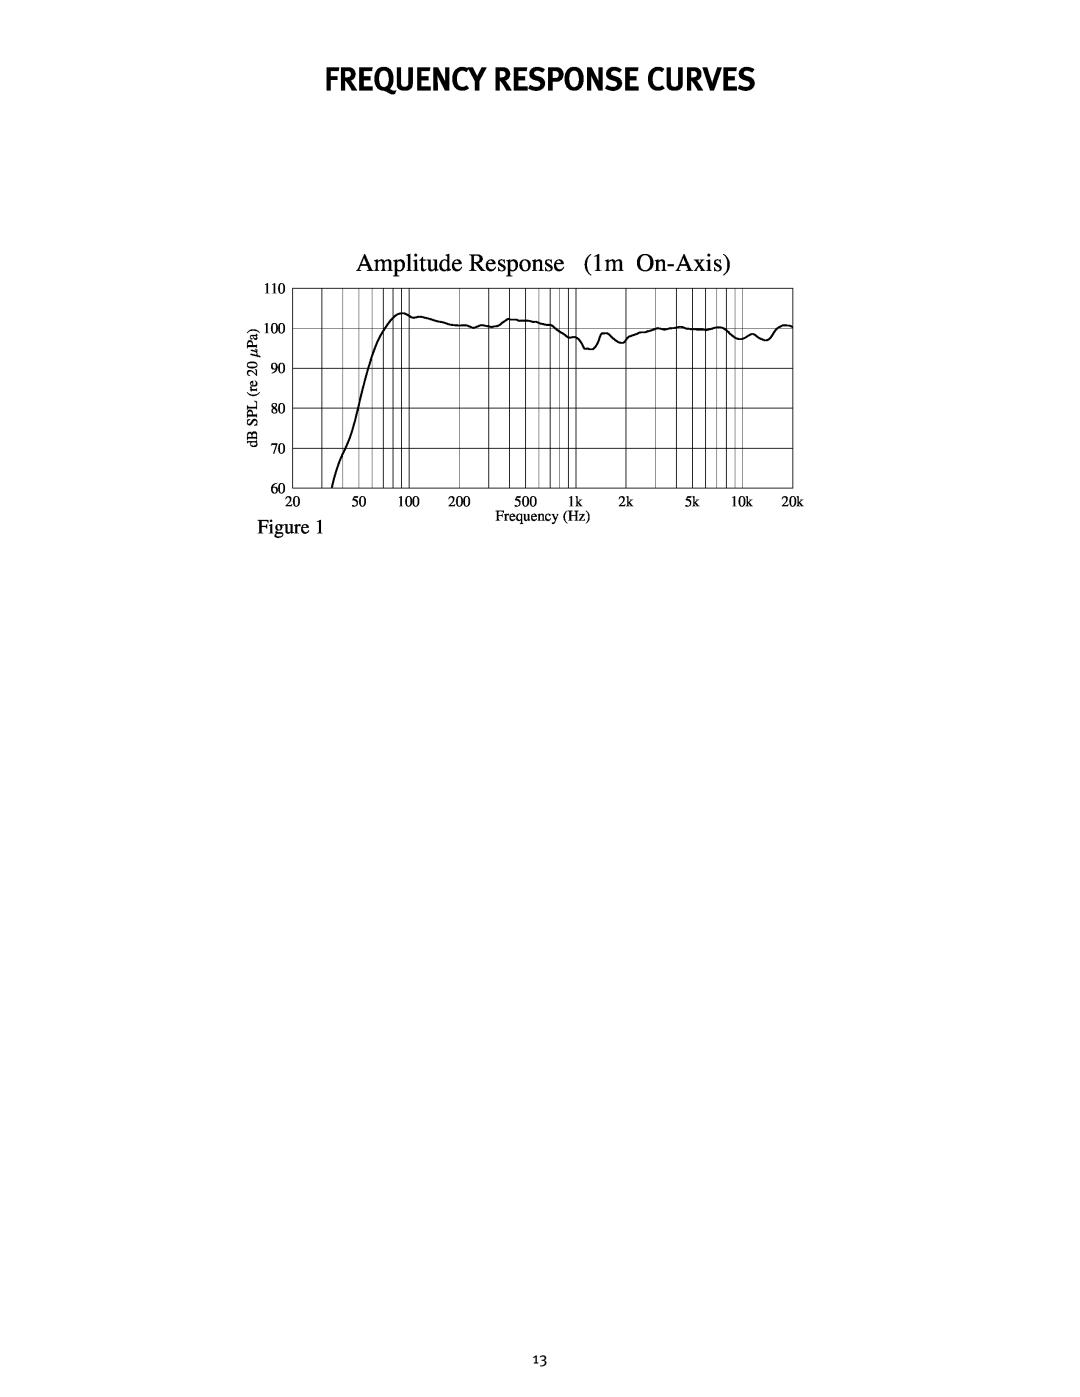 Peavey 10P manual Frequency Response Curves, Amplitude Response, 1m On-Axis 